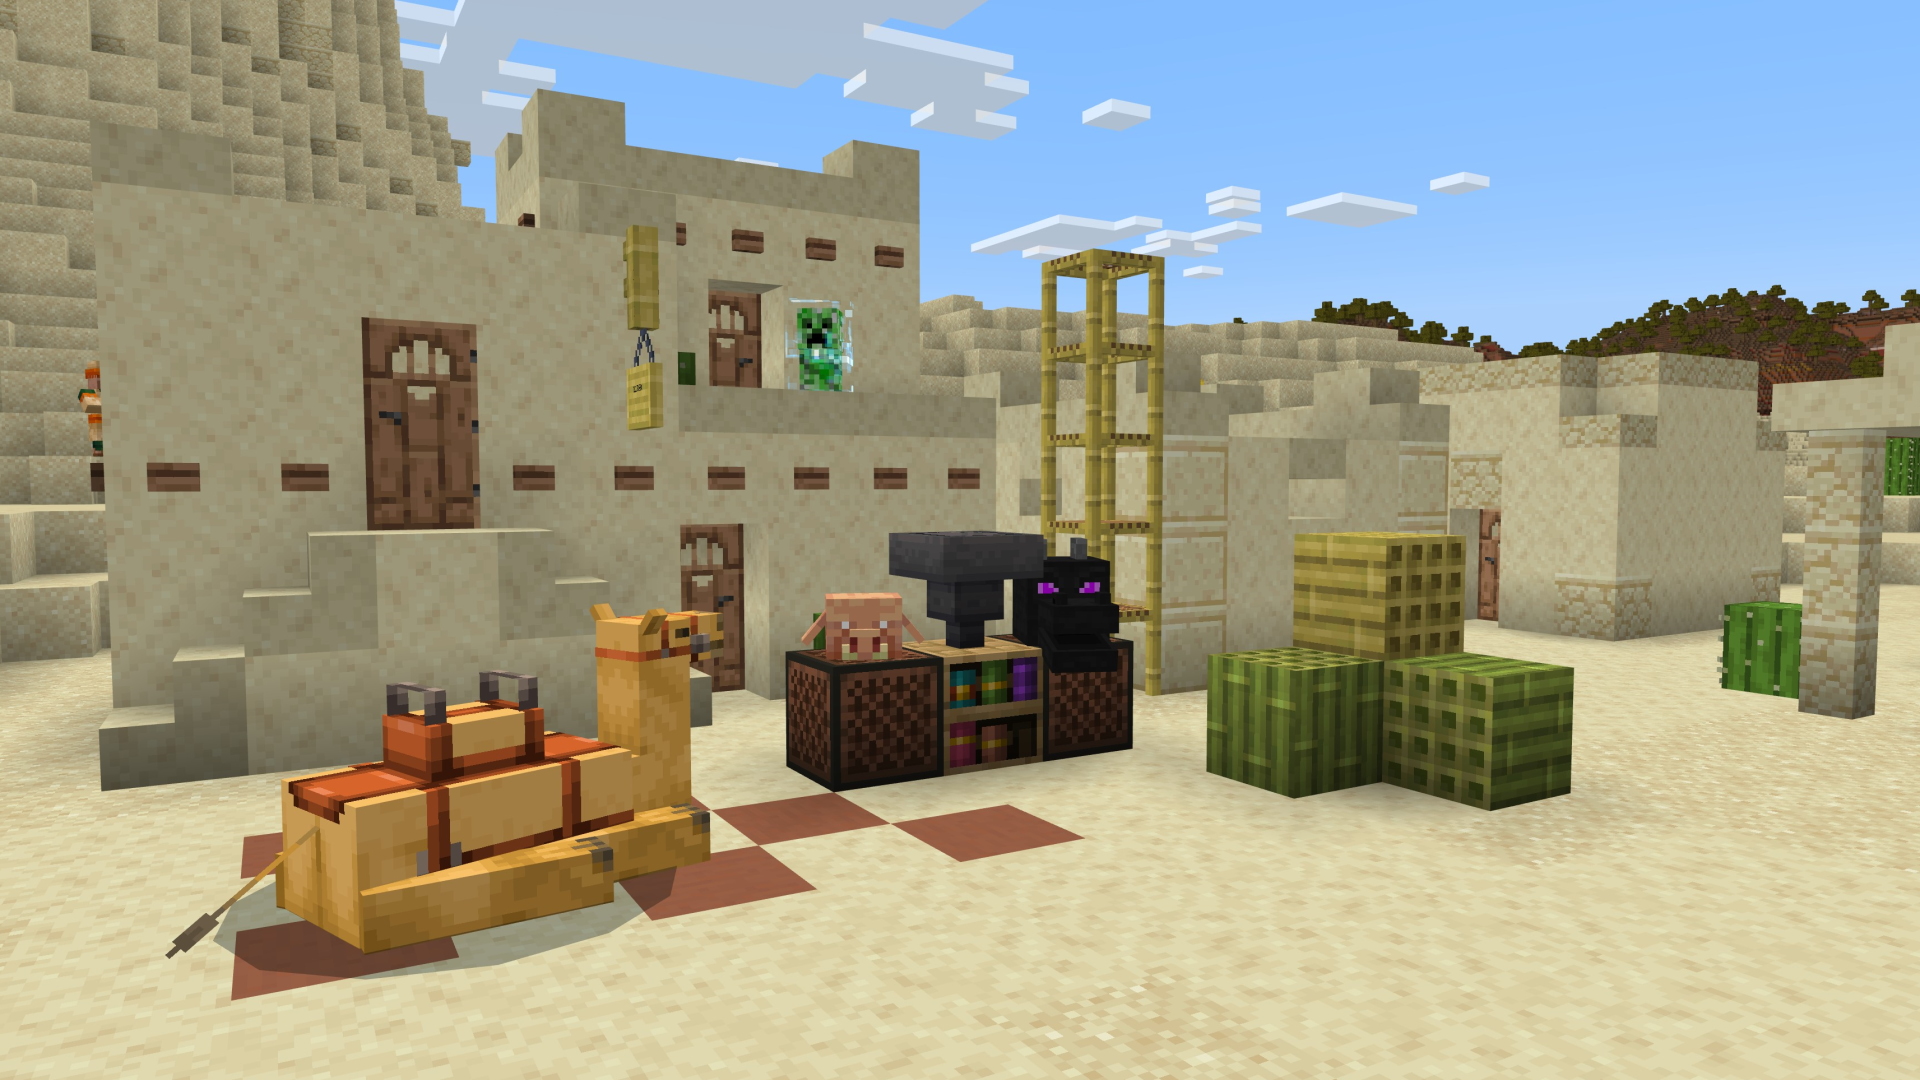 Download Minecraft 1.19.51 v(full version) APK on Android free